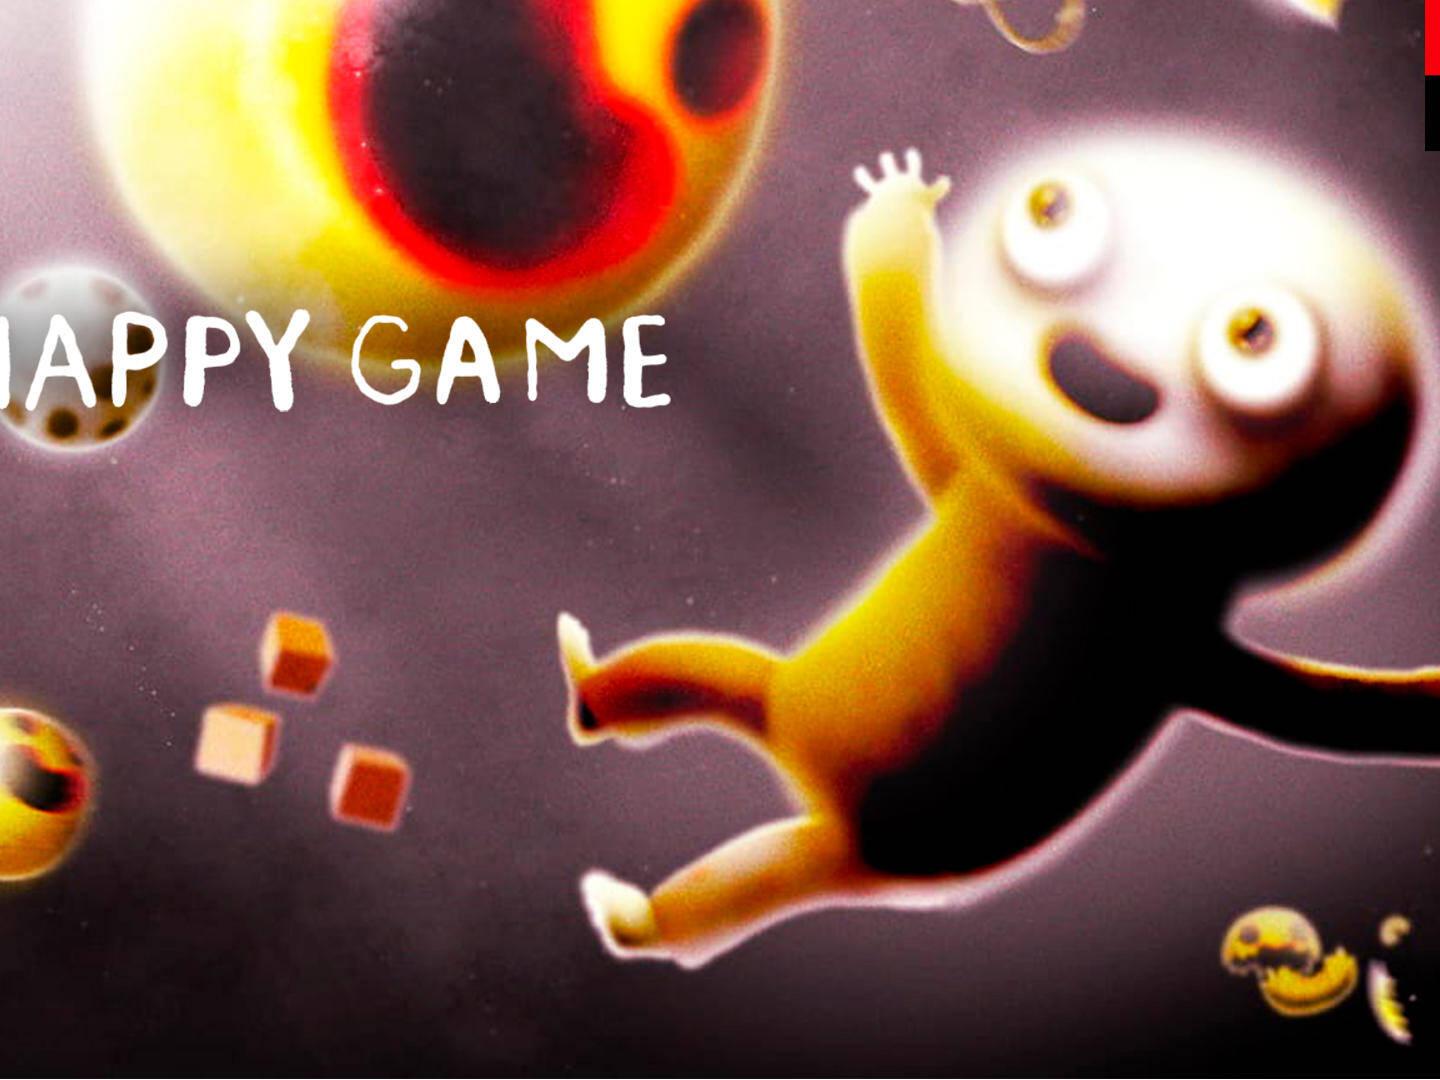 Happy Game on Steam